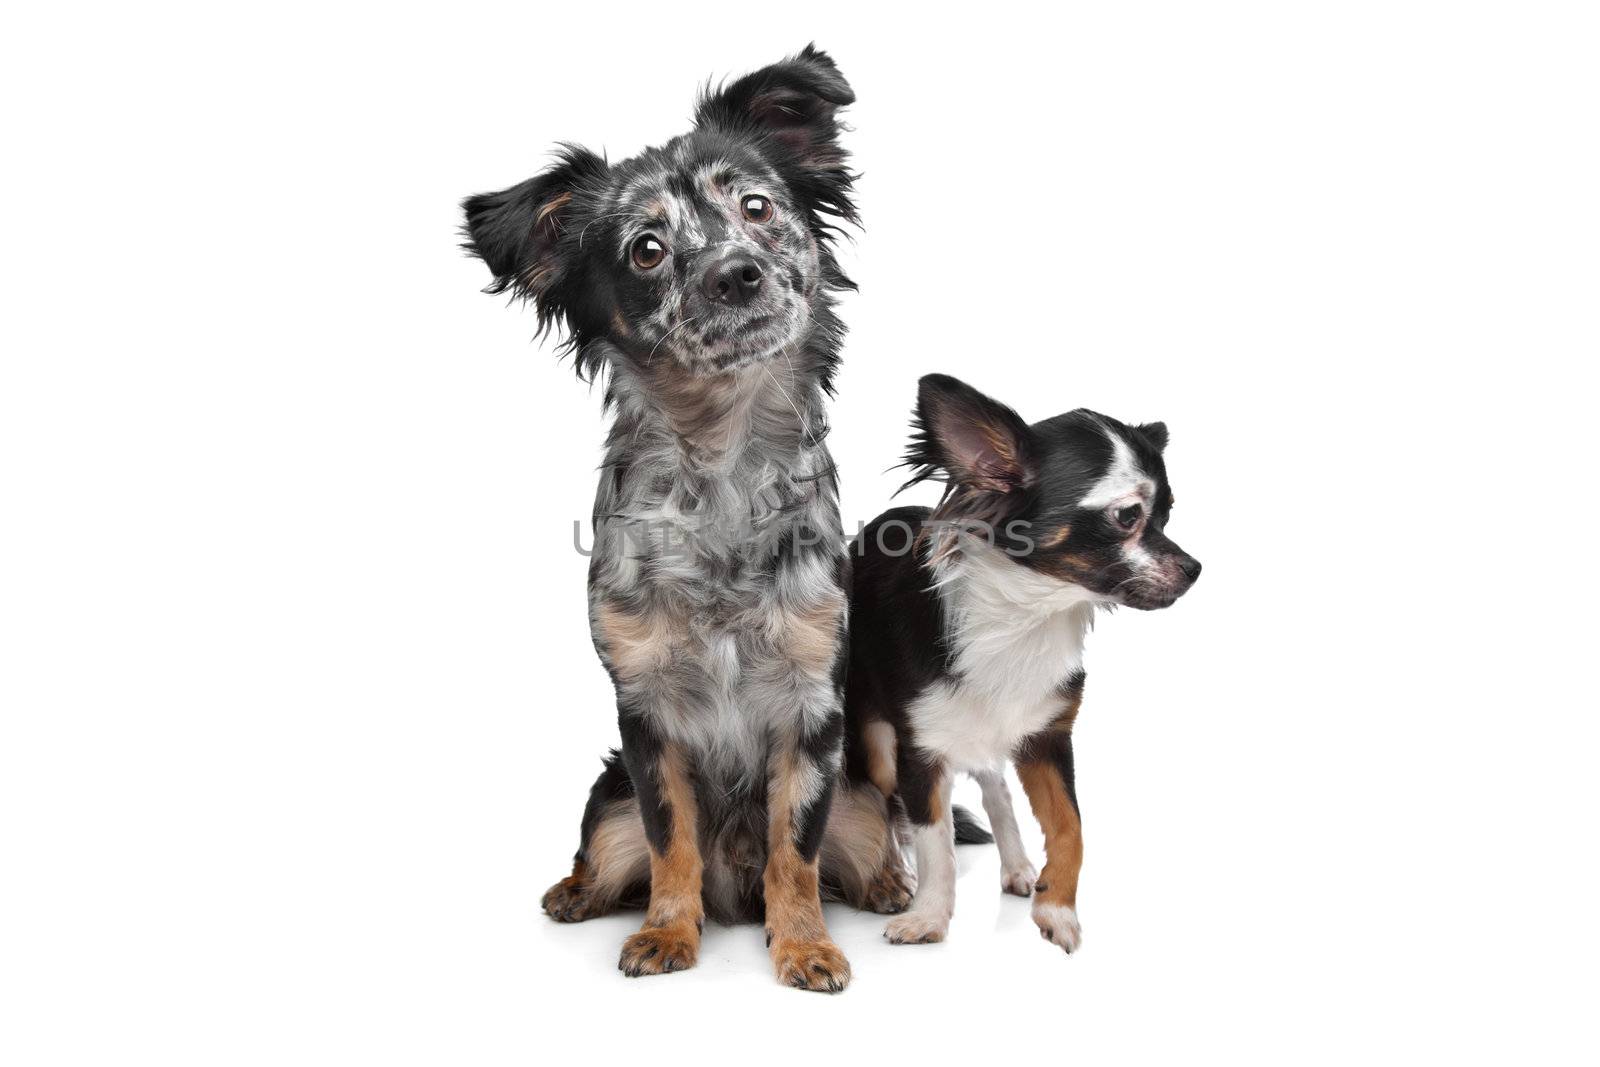 Two Chihuahua dogs in front of a white background